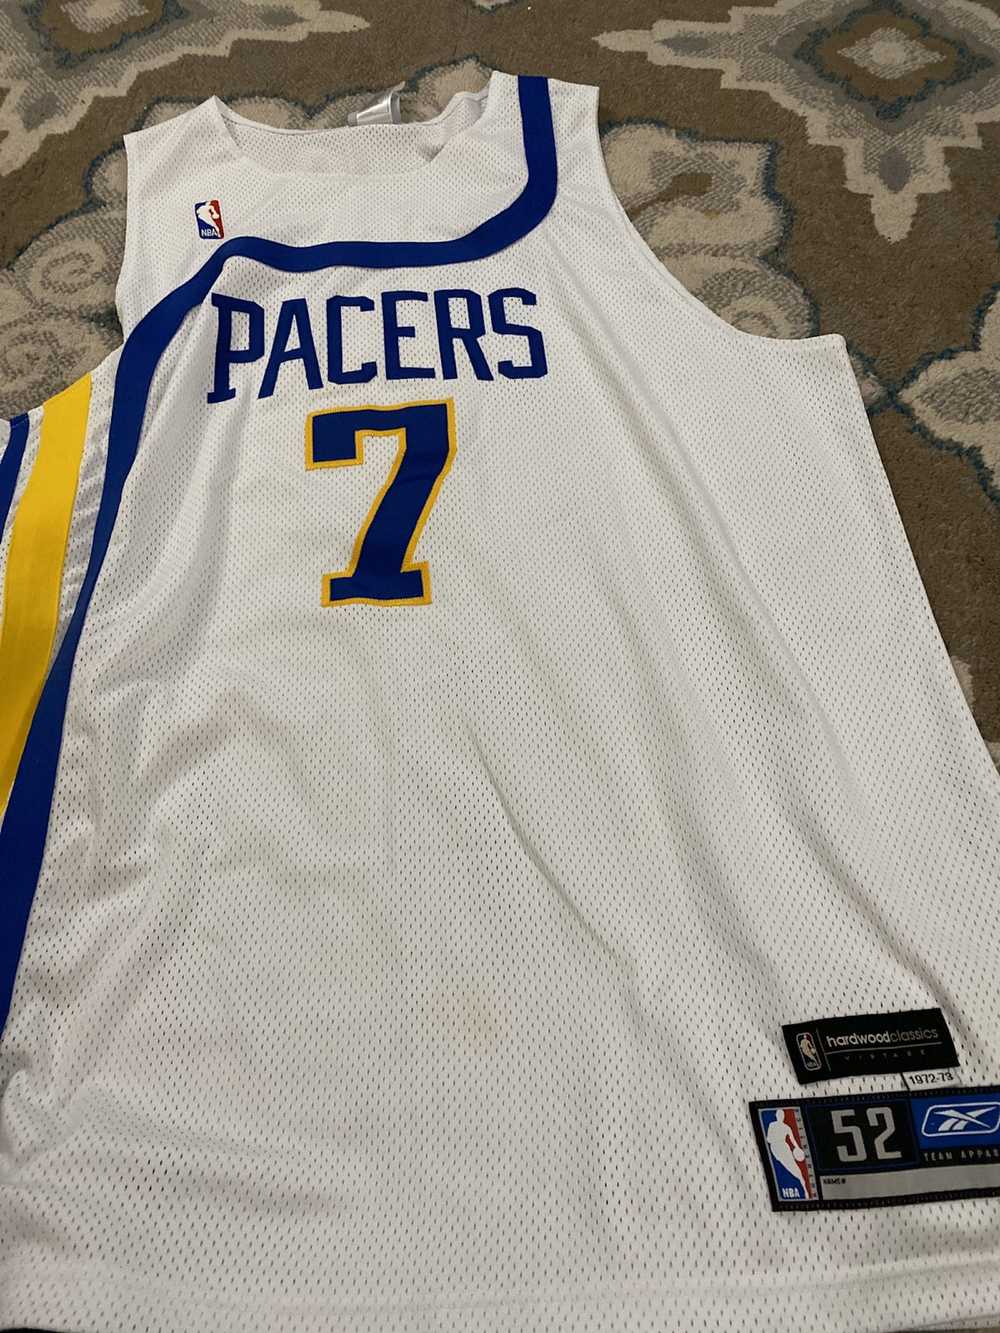 Reebok O’Neal Pacers Basketball Jersey Stitched R… - image 2